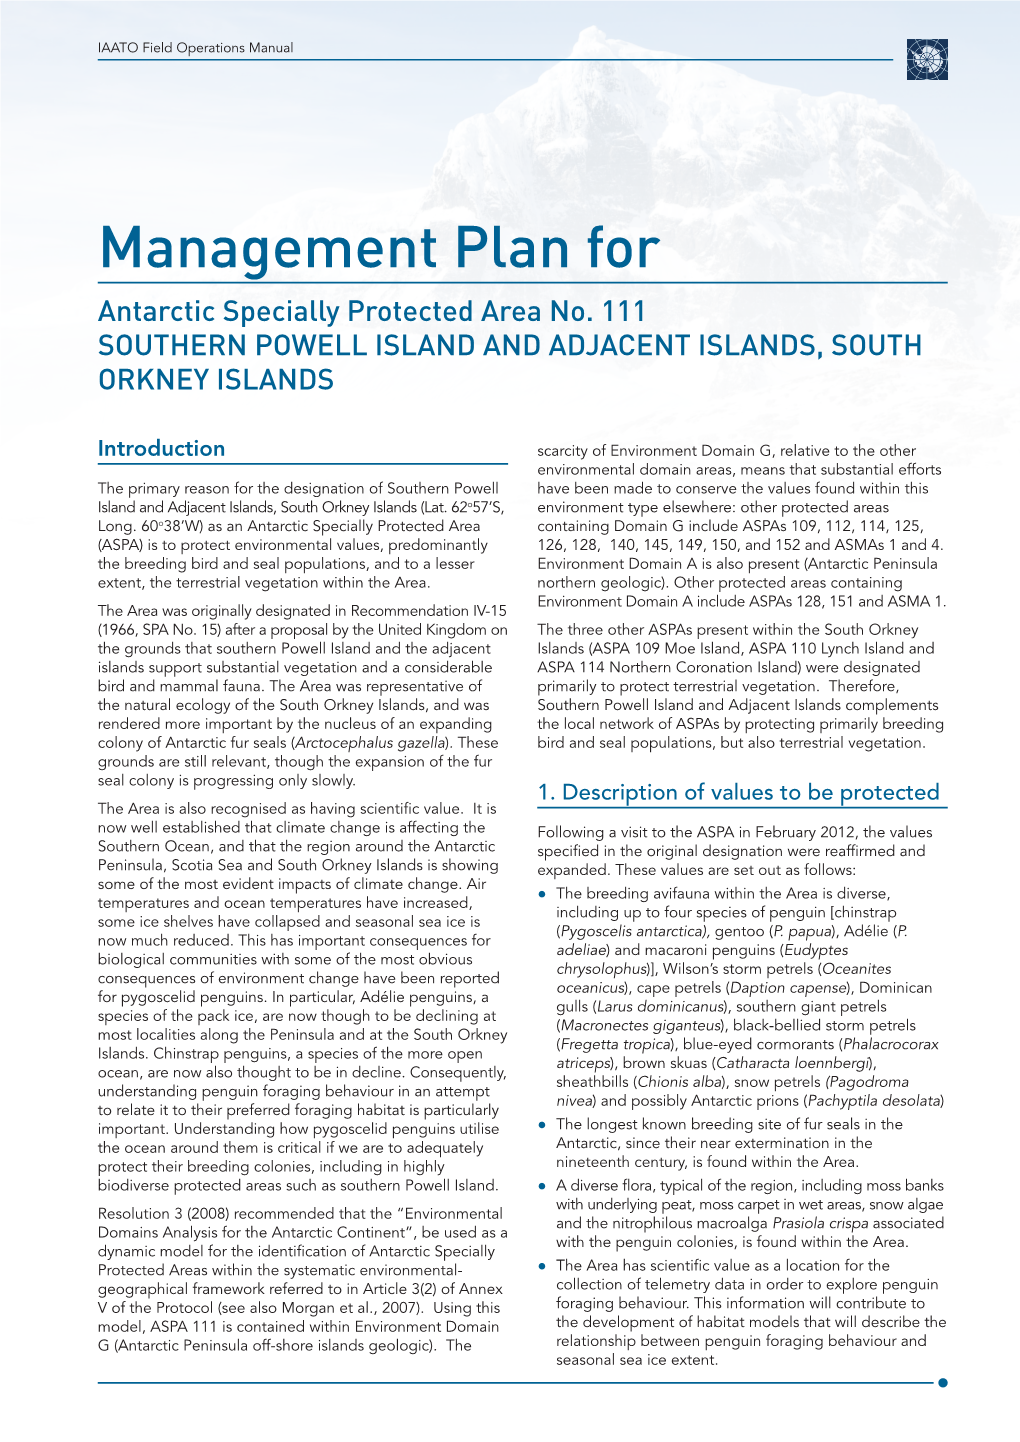 Management Plan for Antarctic Specially Protected Area No